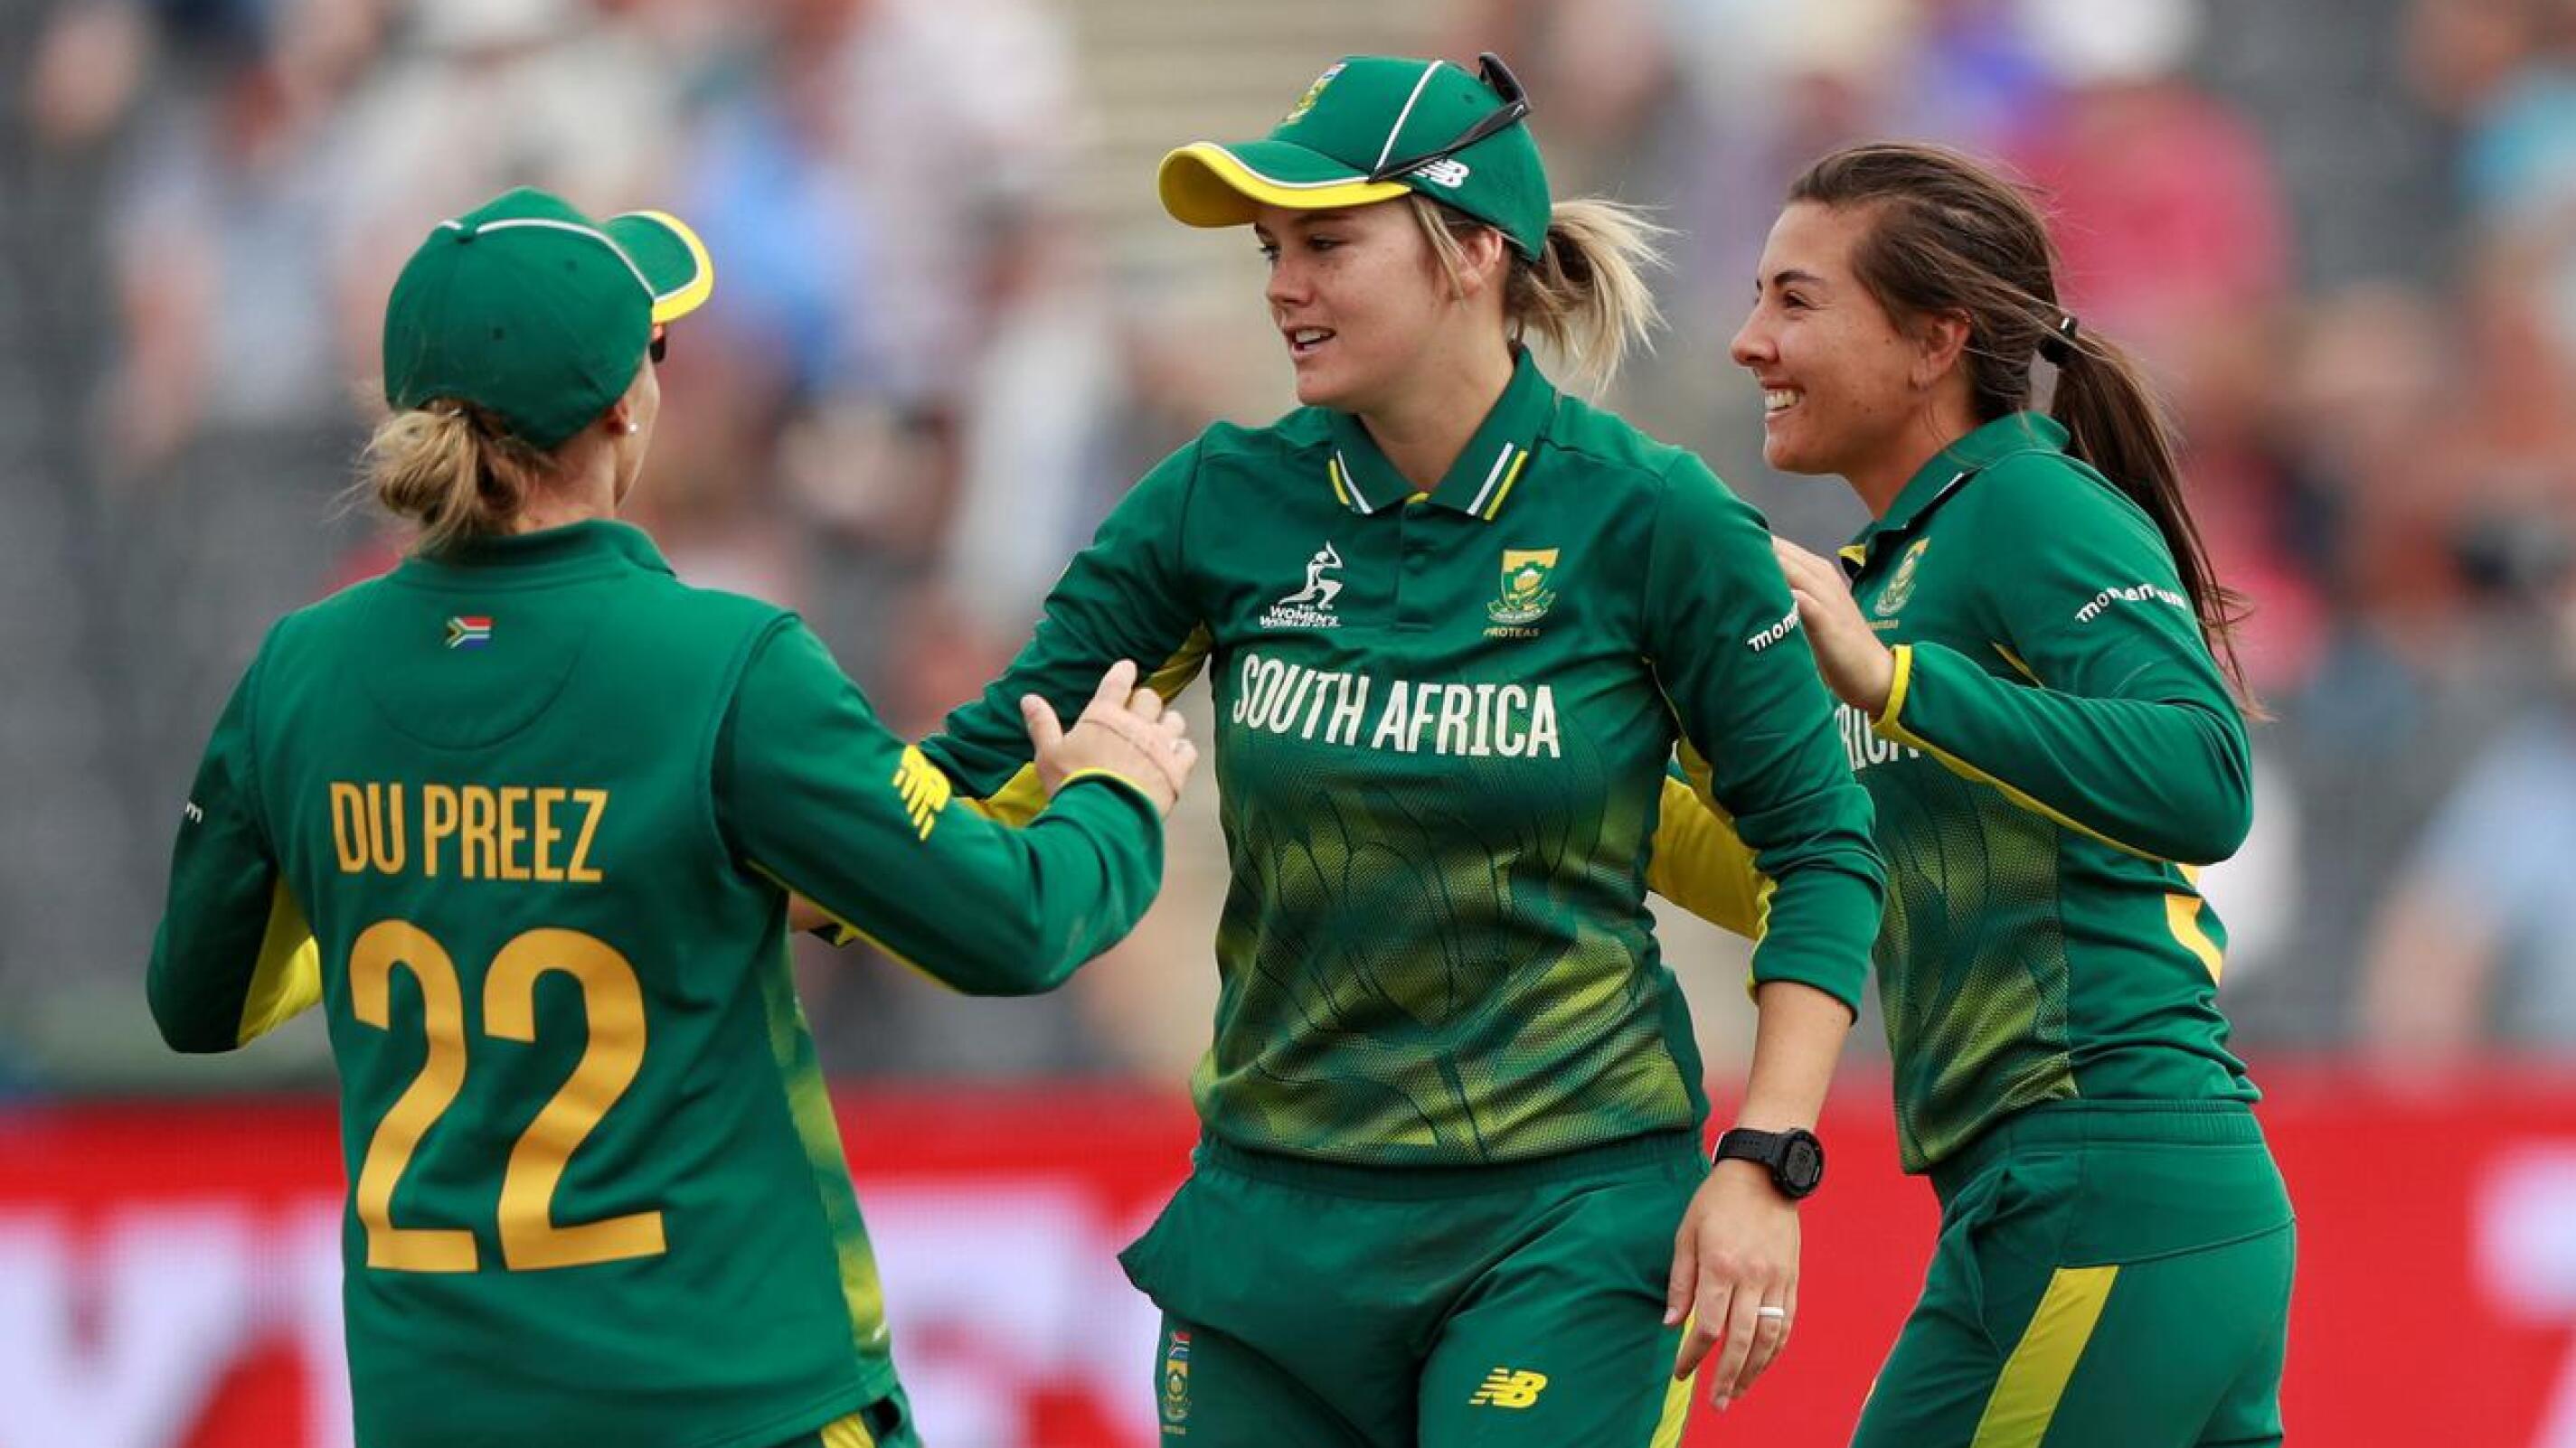 The Proteas women in action